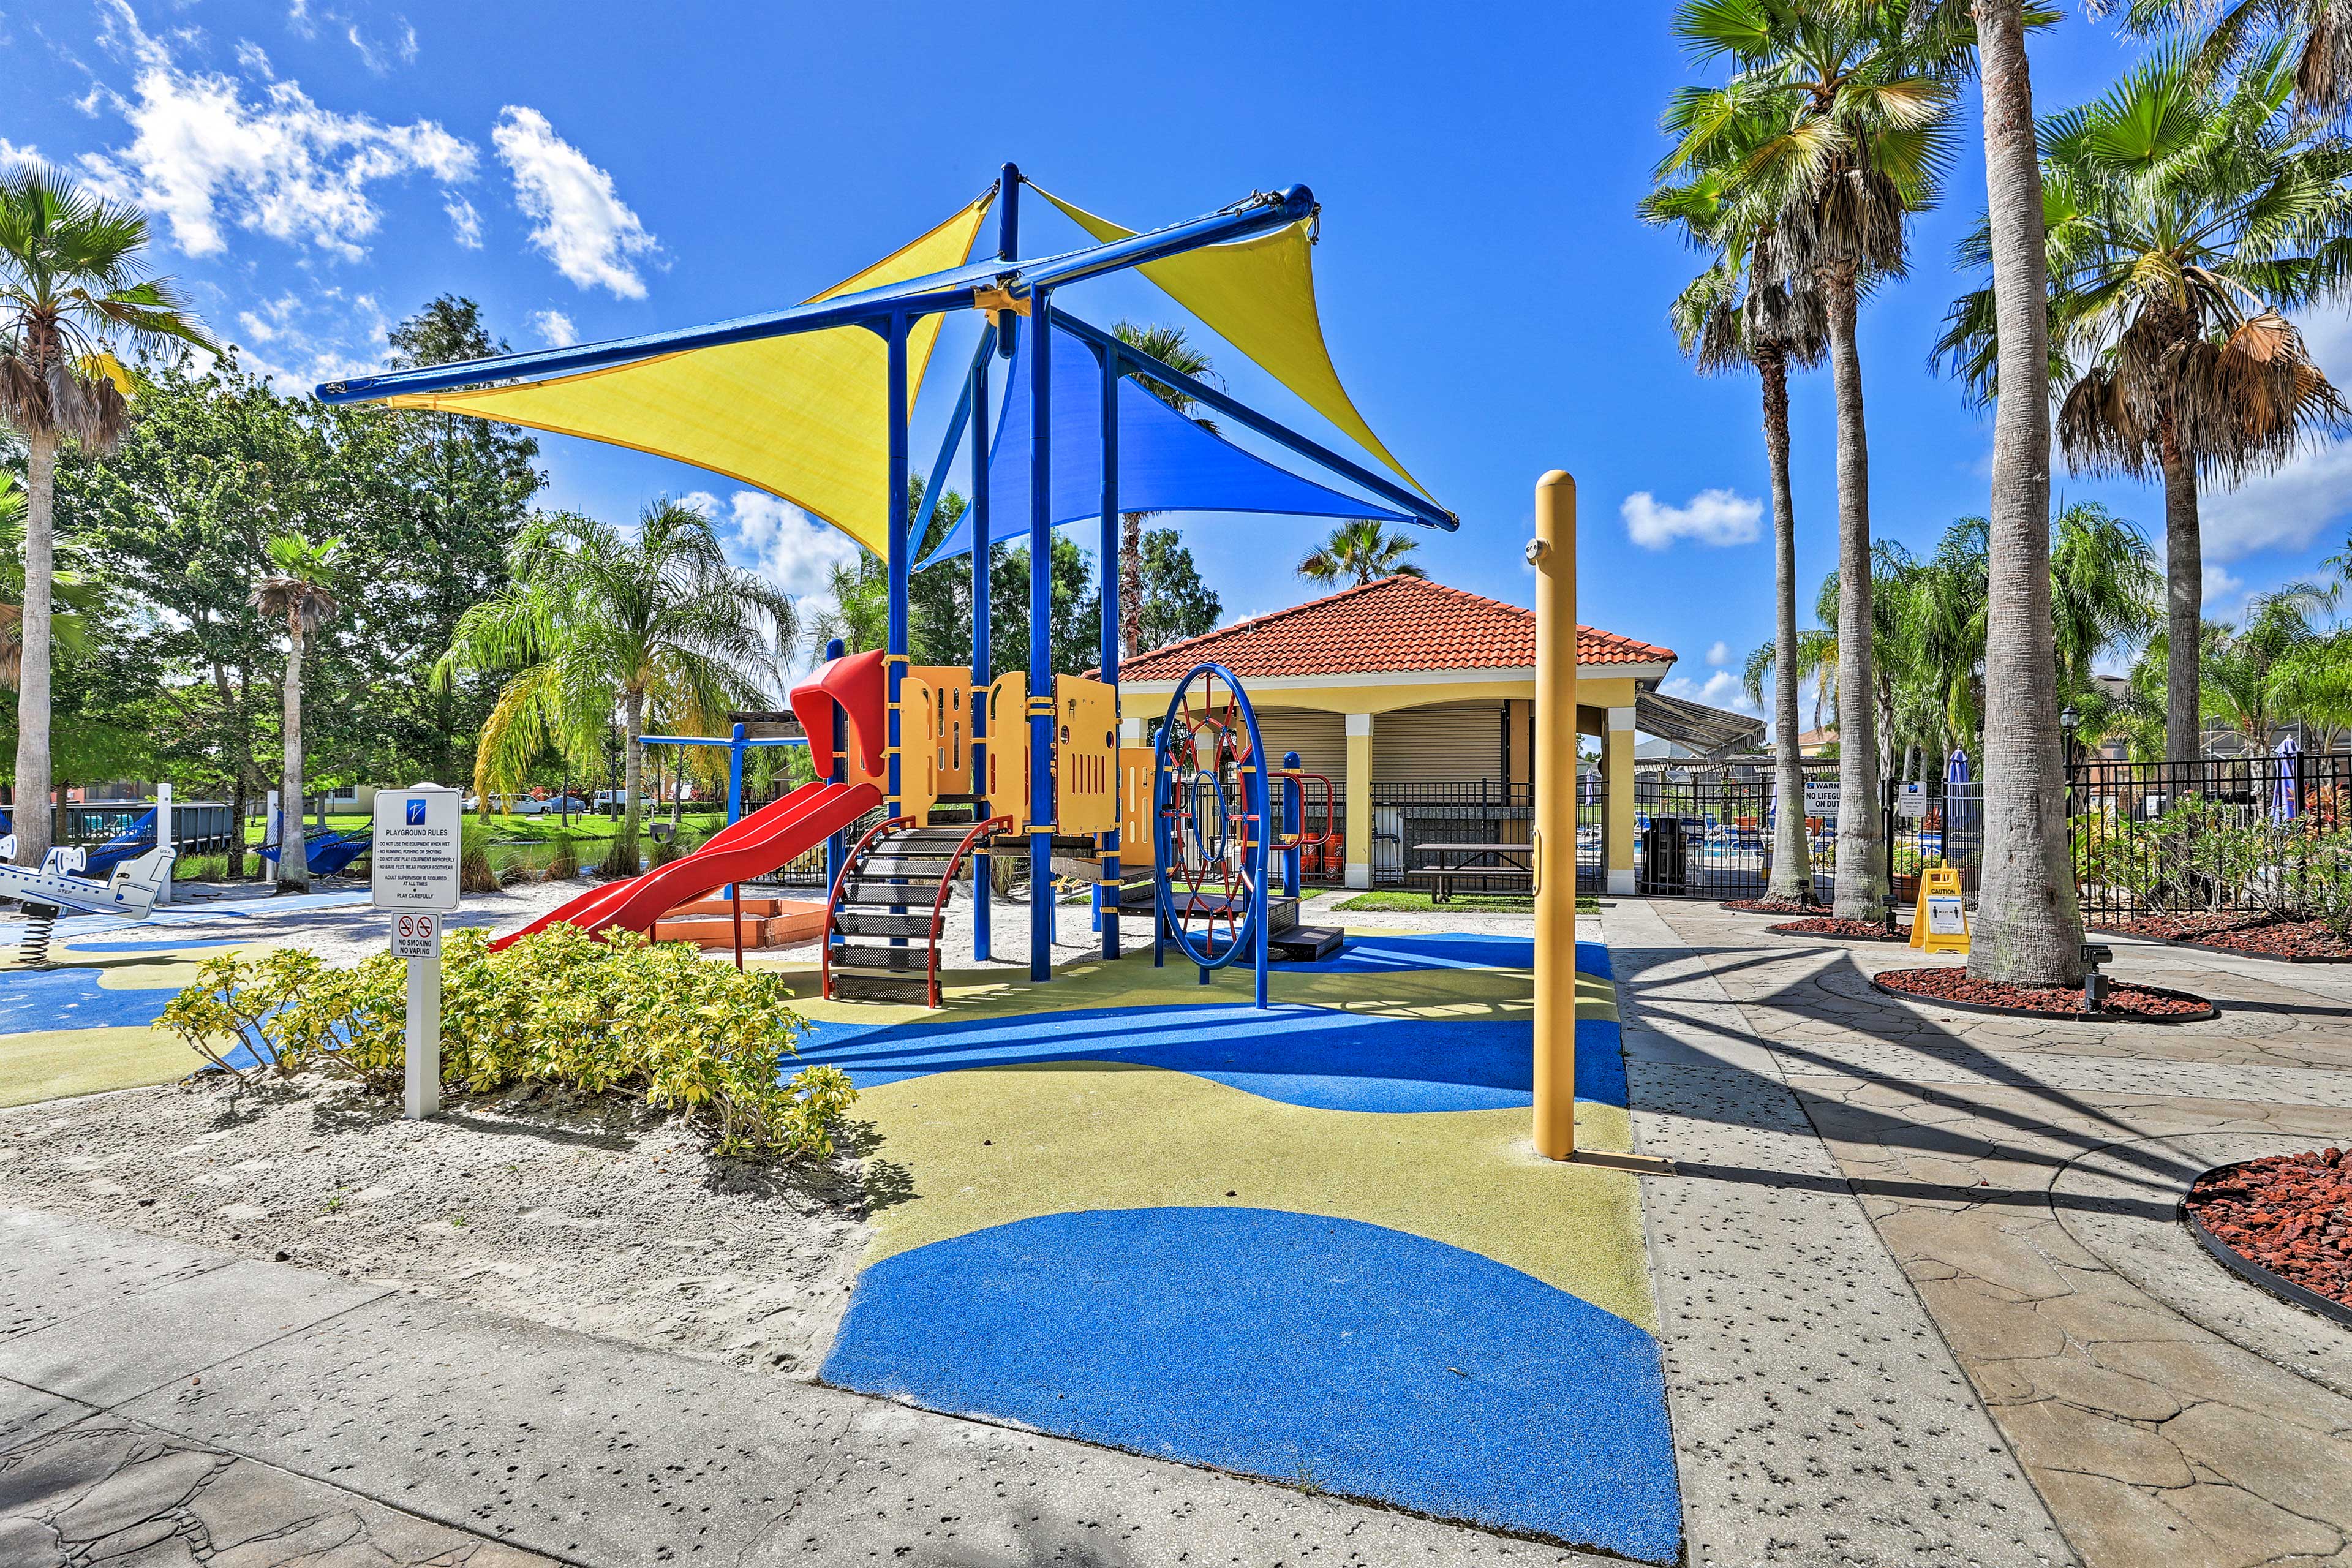 The kids are sure to love the play area!